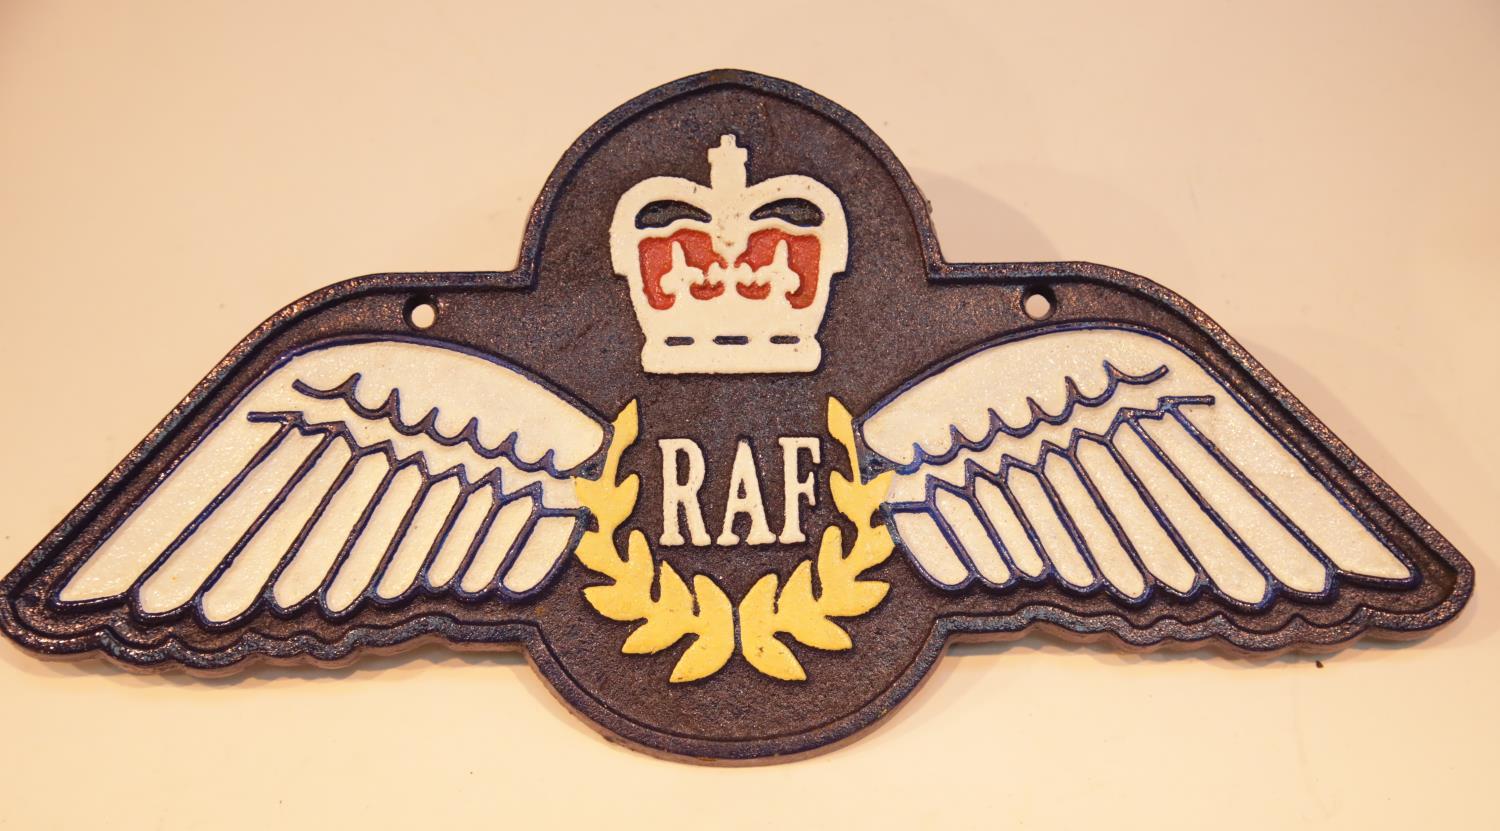 Cast iron RAF wings sign, 34 x 17 cm. P&P Group 2 (£18+VAT for the first lot and £2+VAT for